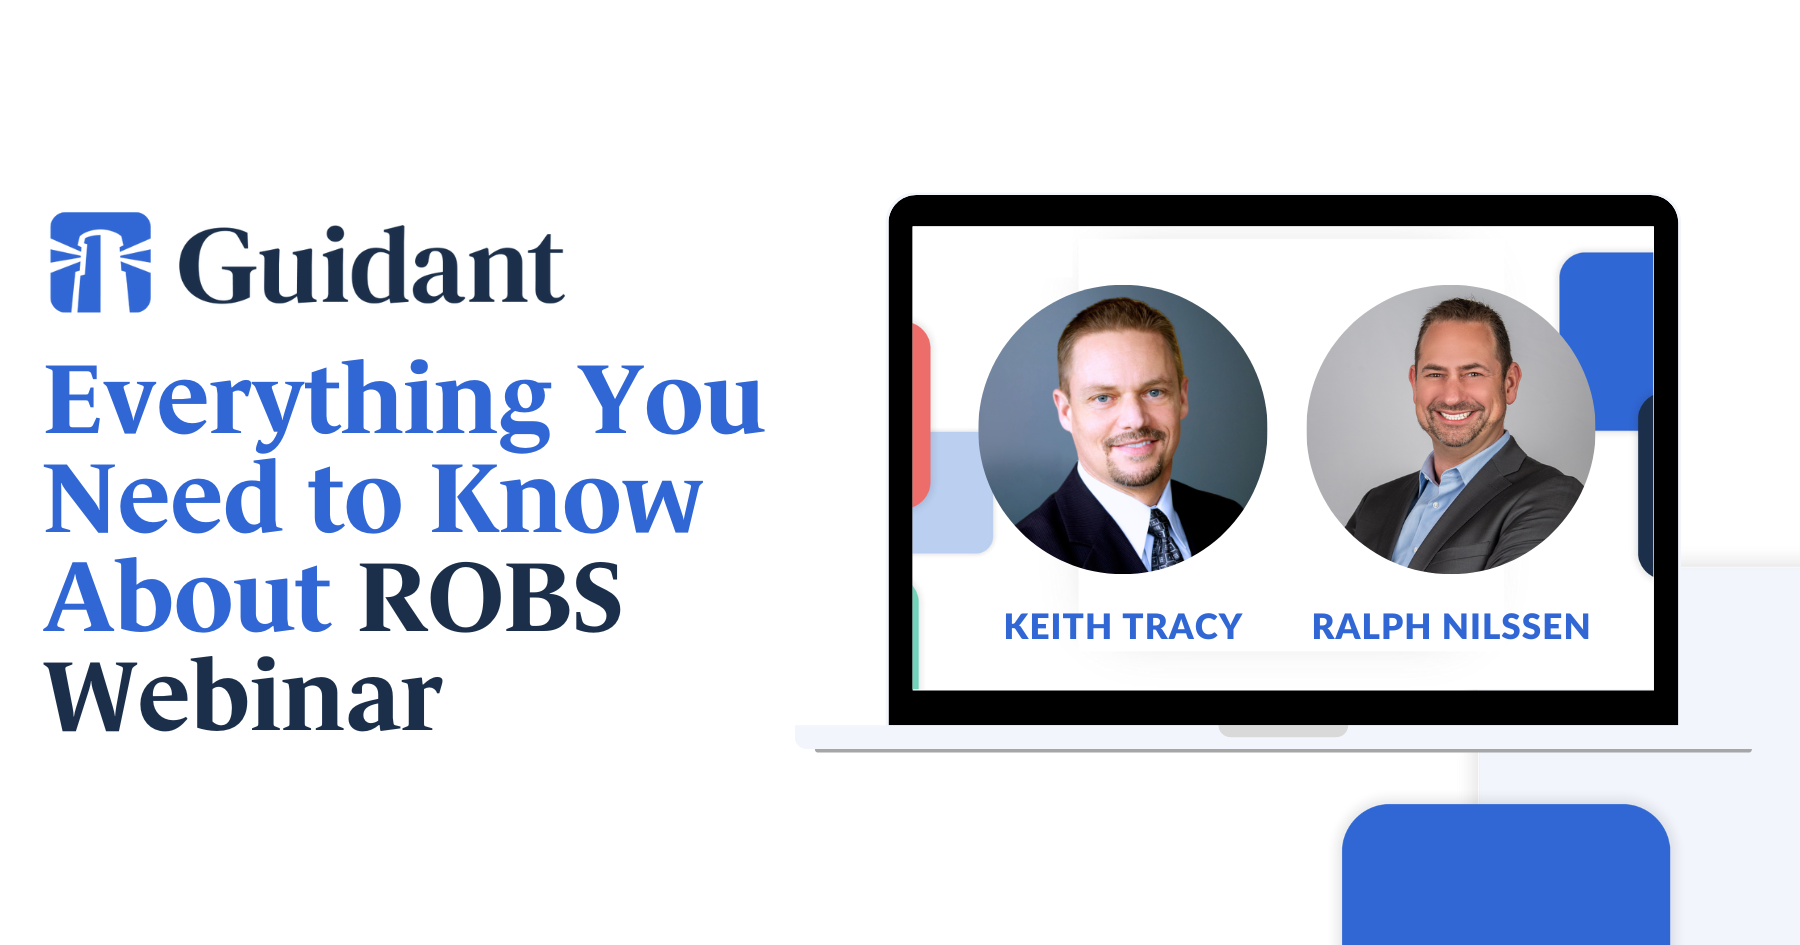 "Everything You Need to Know About ROBS Webinar: Rollovers for Business Startups (ROBS) Made Easy" with Keith Tracy and Ralph Nilssen from Guidant Financial.